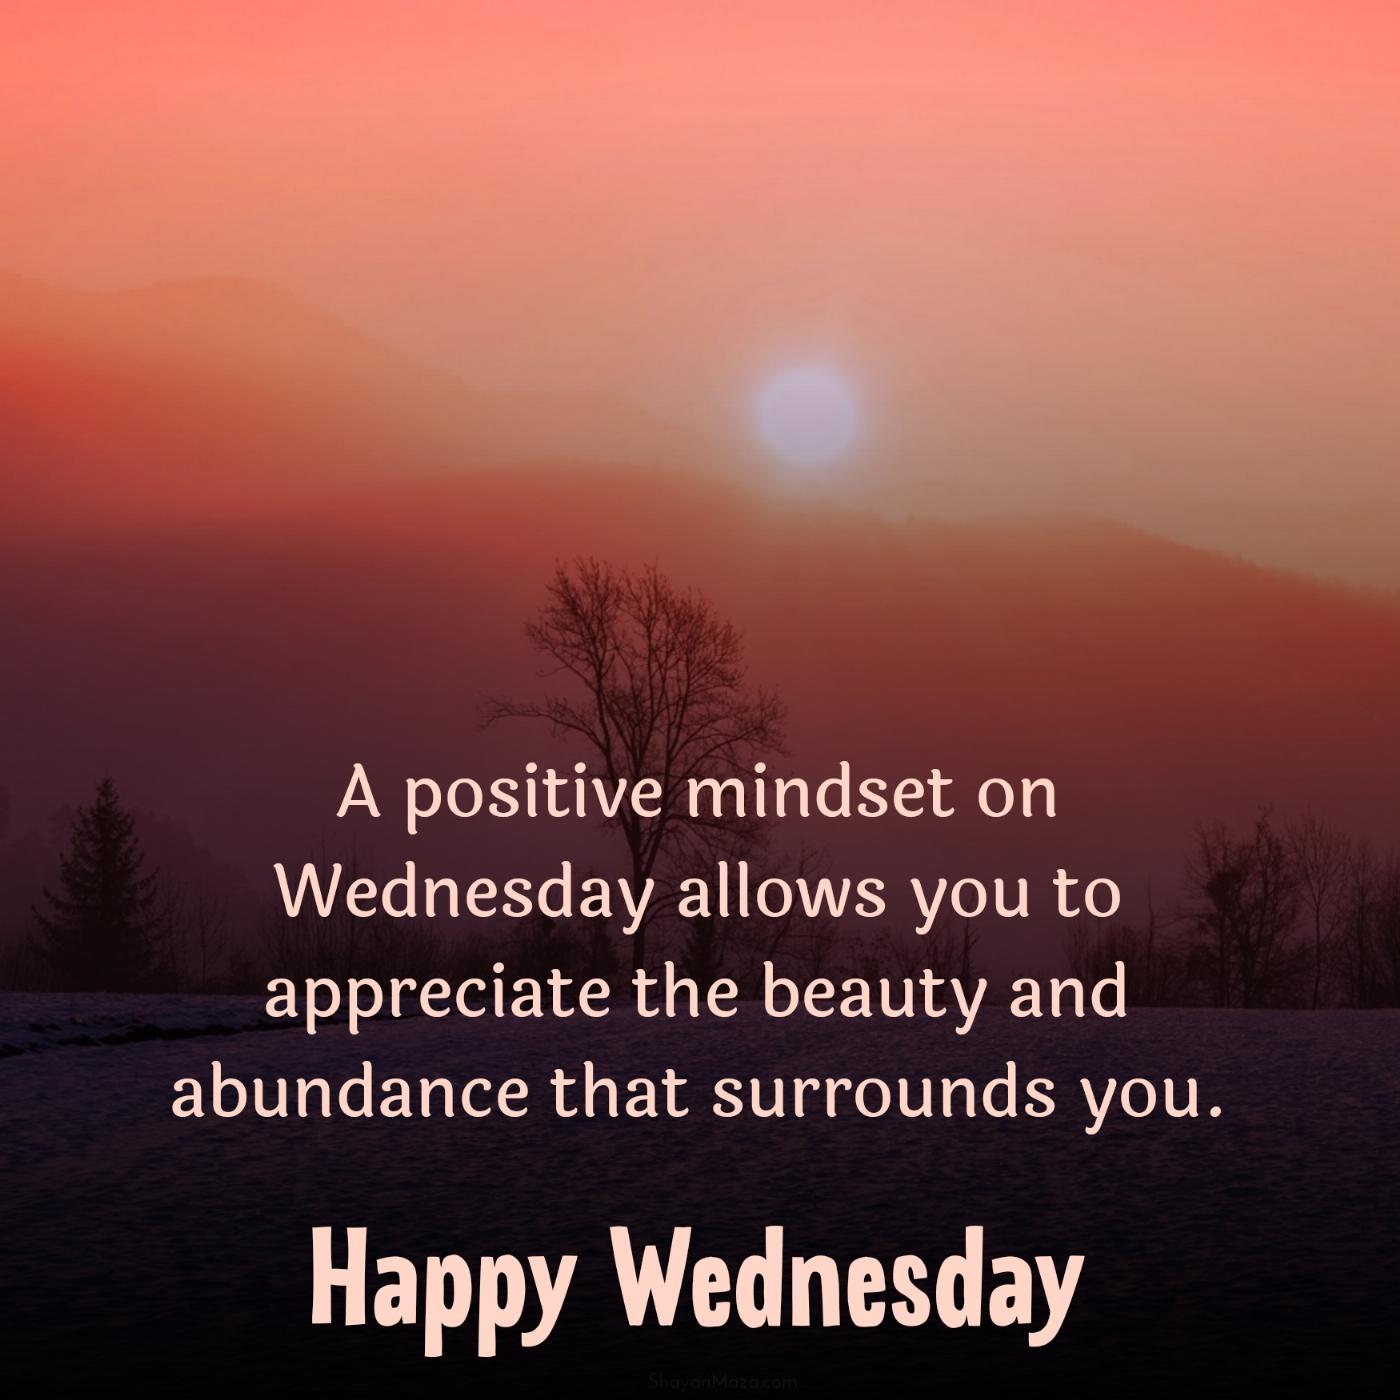 A positive mindset on Wednesday allows you to appreciate